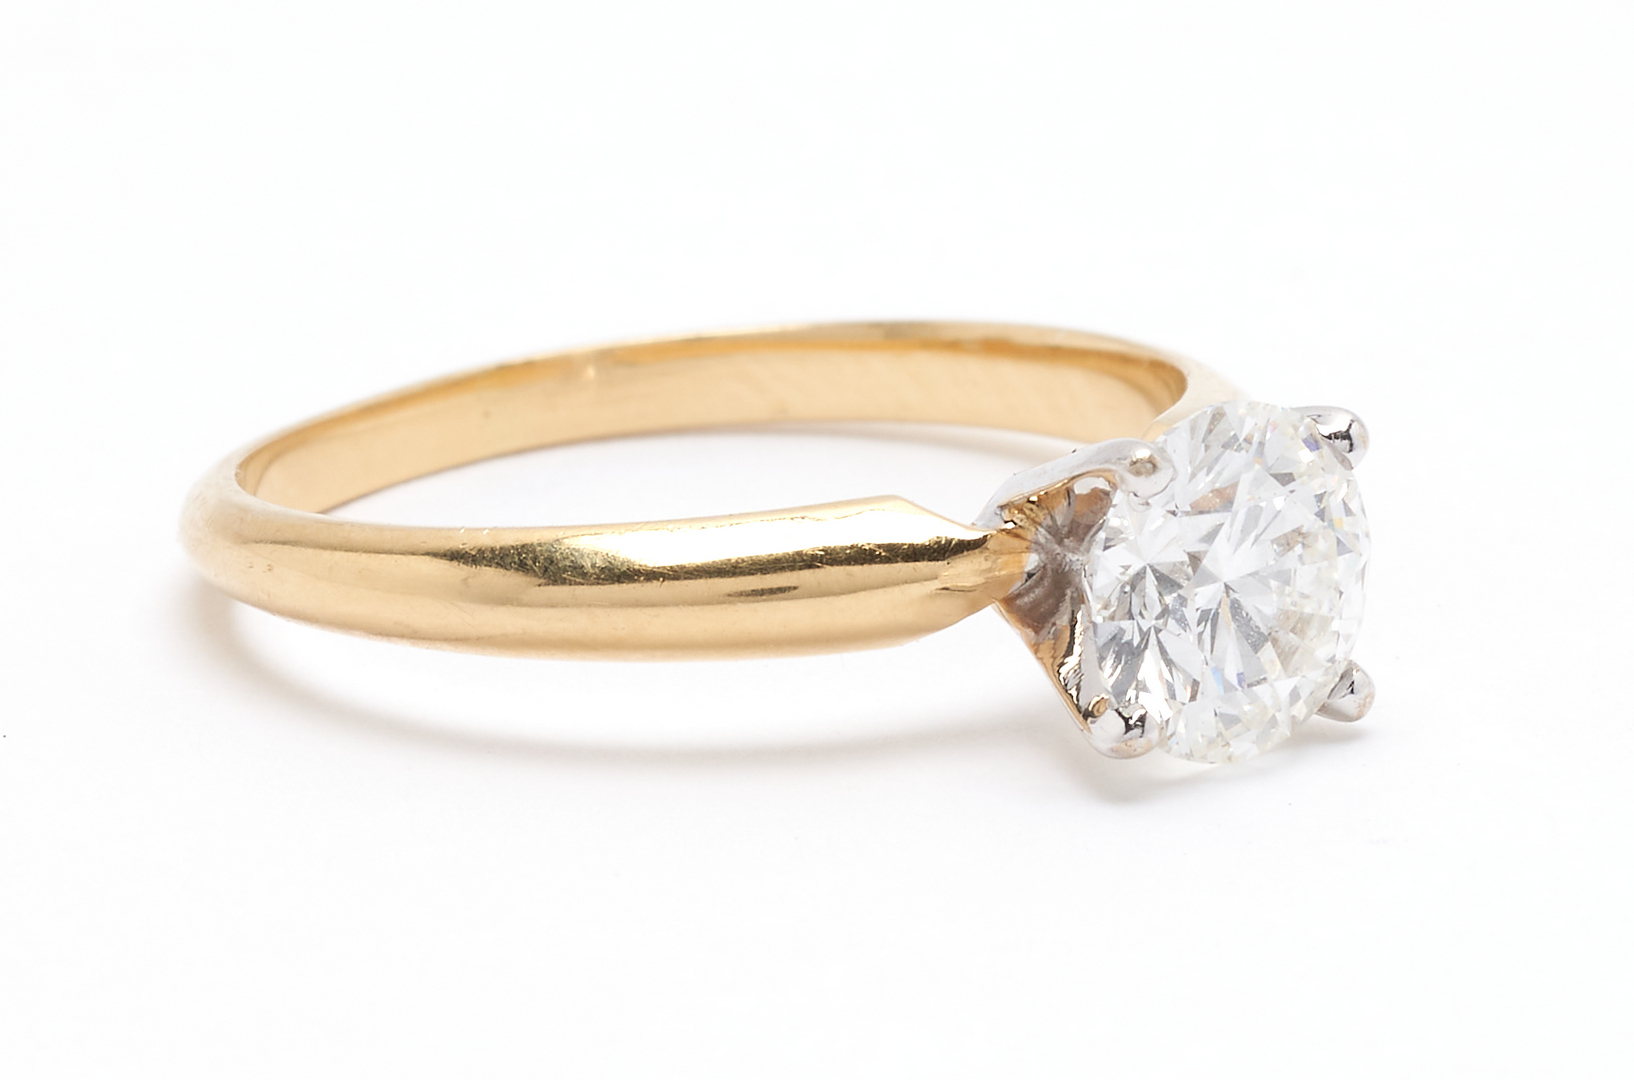 Lot 43: 1.03 Carat GIA Diamond Ring, F Color and 18K Dia. Band